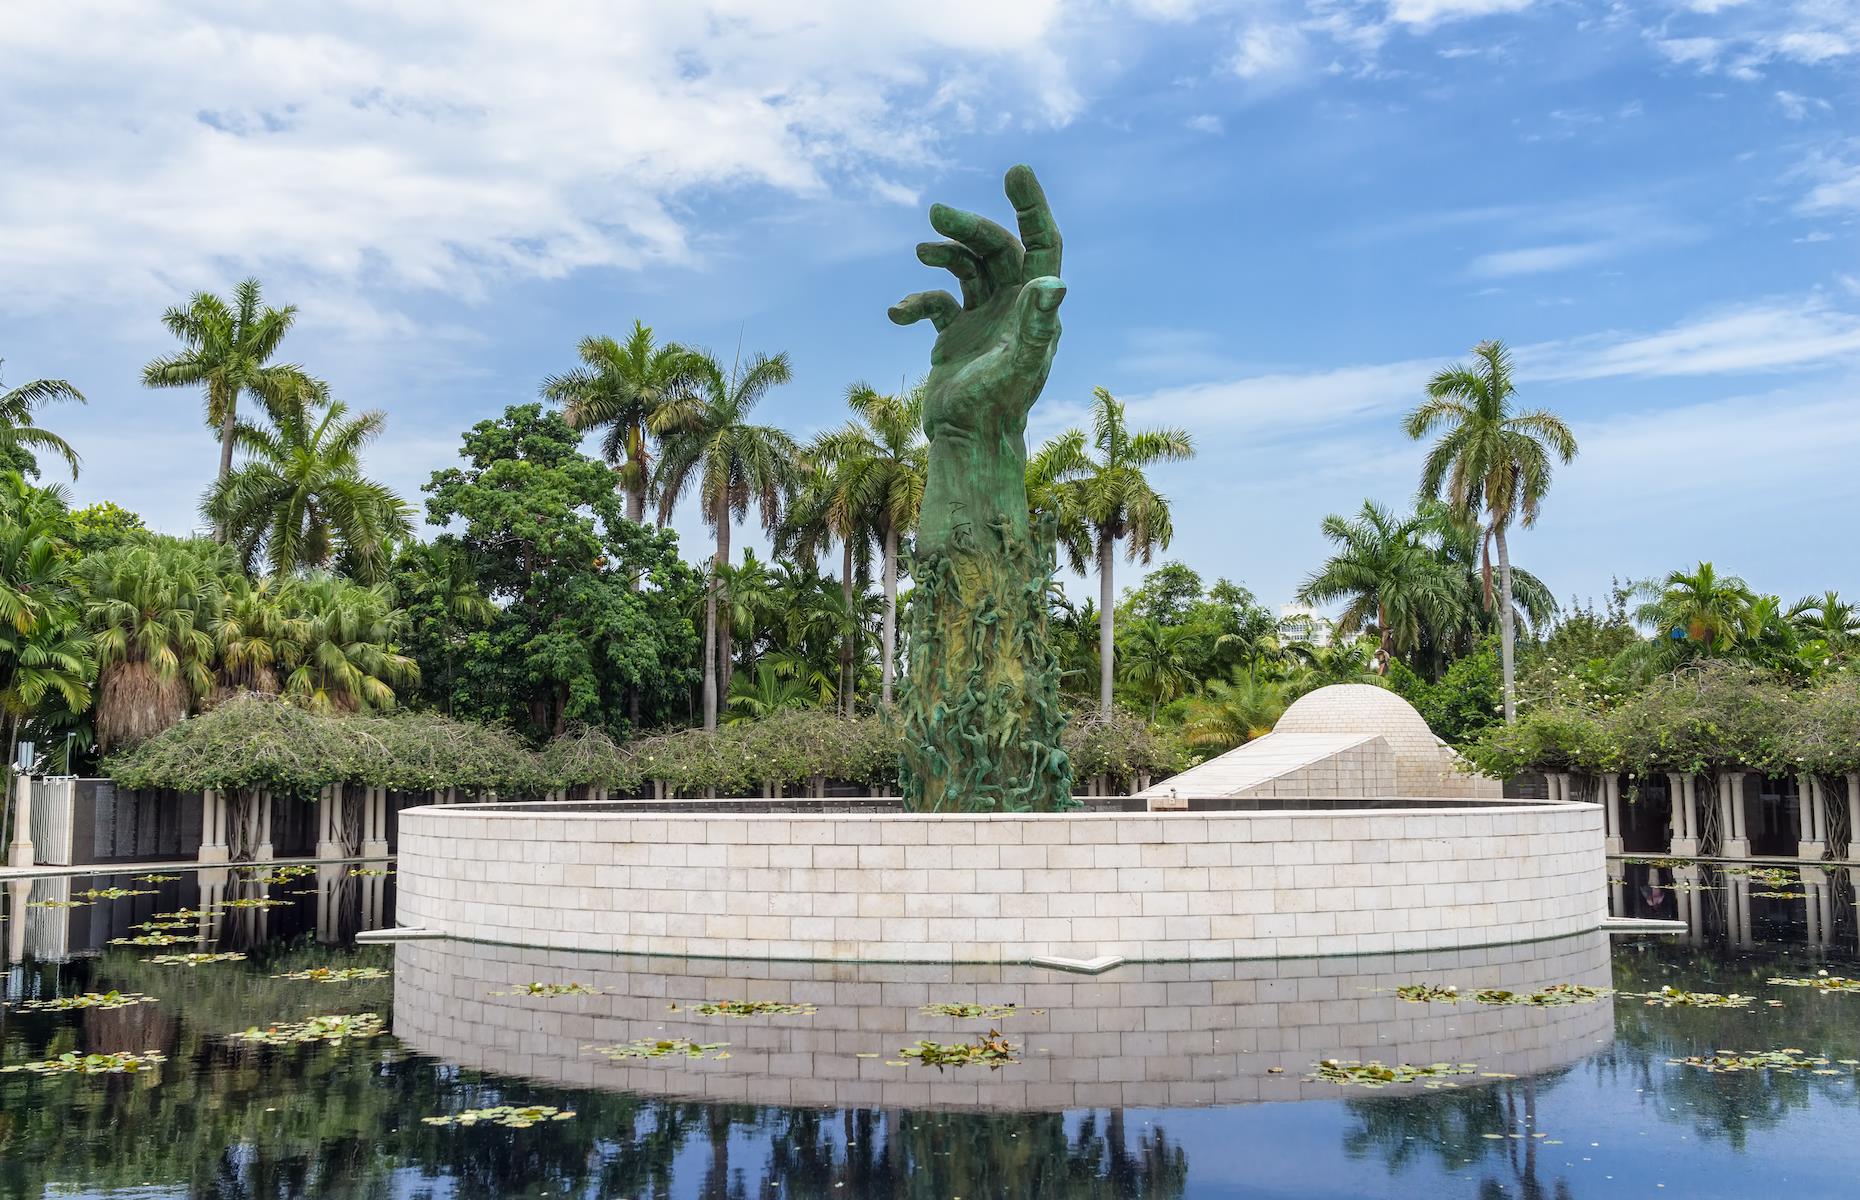 Many museums in Florida are either free to visit or have regular free admission days. Many museums in Orlando, for example, offer visitors free entry on the first weekend of every month. Meanwhile, these are some that remain free year-round: The Florida Museum of Natural History and the Harn Museum of Art in Gainesville; the Holocaust Memorial Miami Beach (pictured); the Museum of Florida History in Tallahassee; and the National Museum of Naval Aviation in Pensacola.